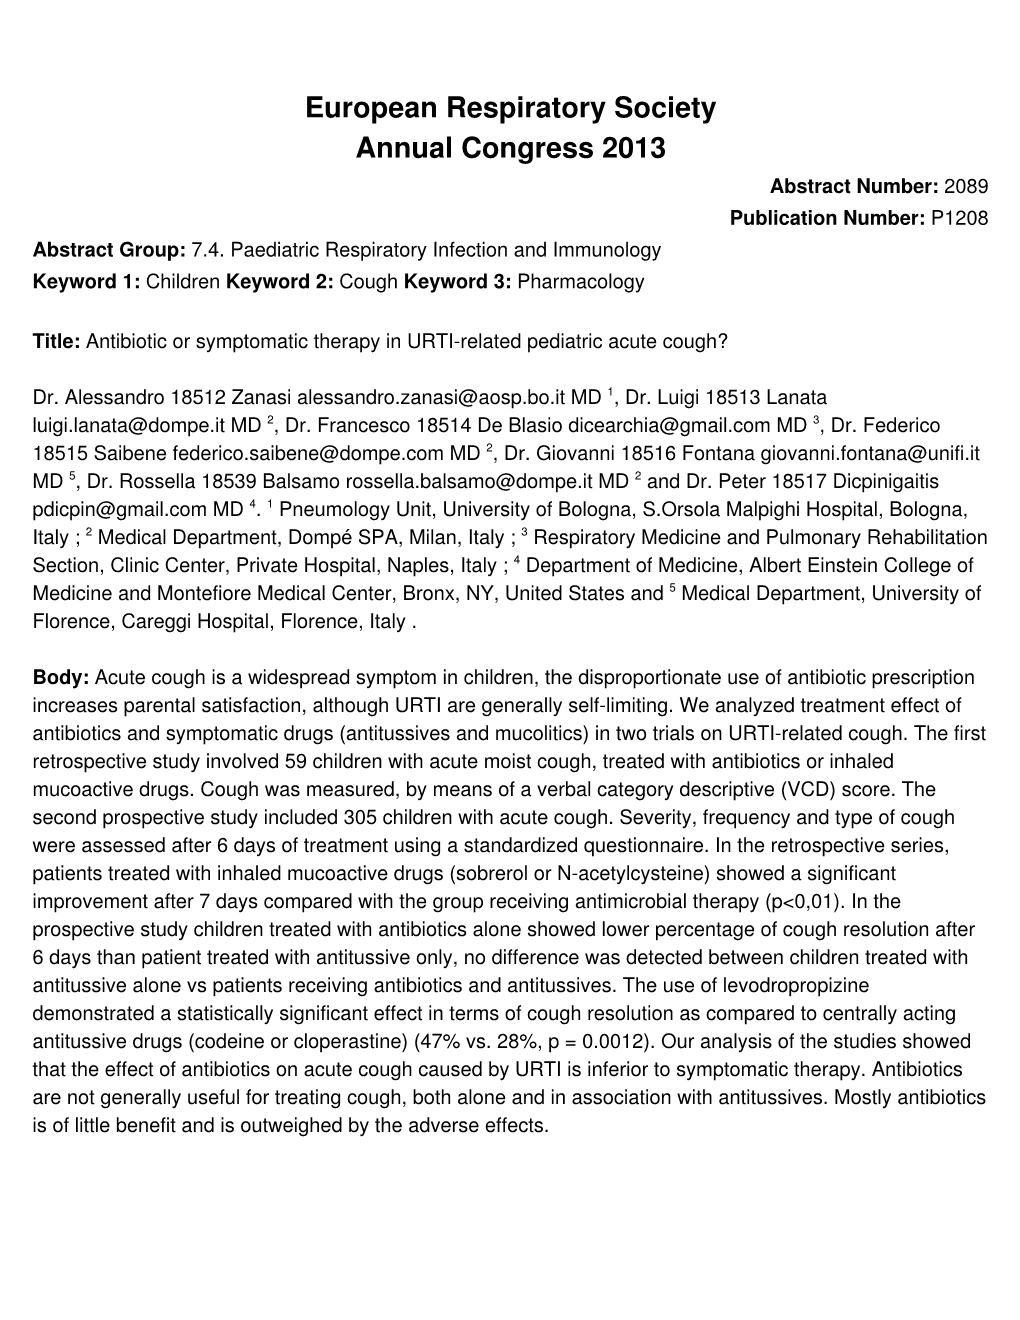 European Respiratory Society Annual Congress 2013 Abstract Number: 2089 Publication Number: P1208 Abstract Group: 7.4